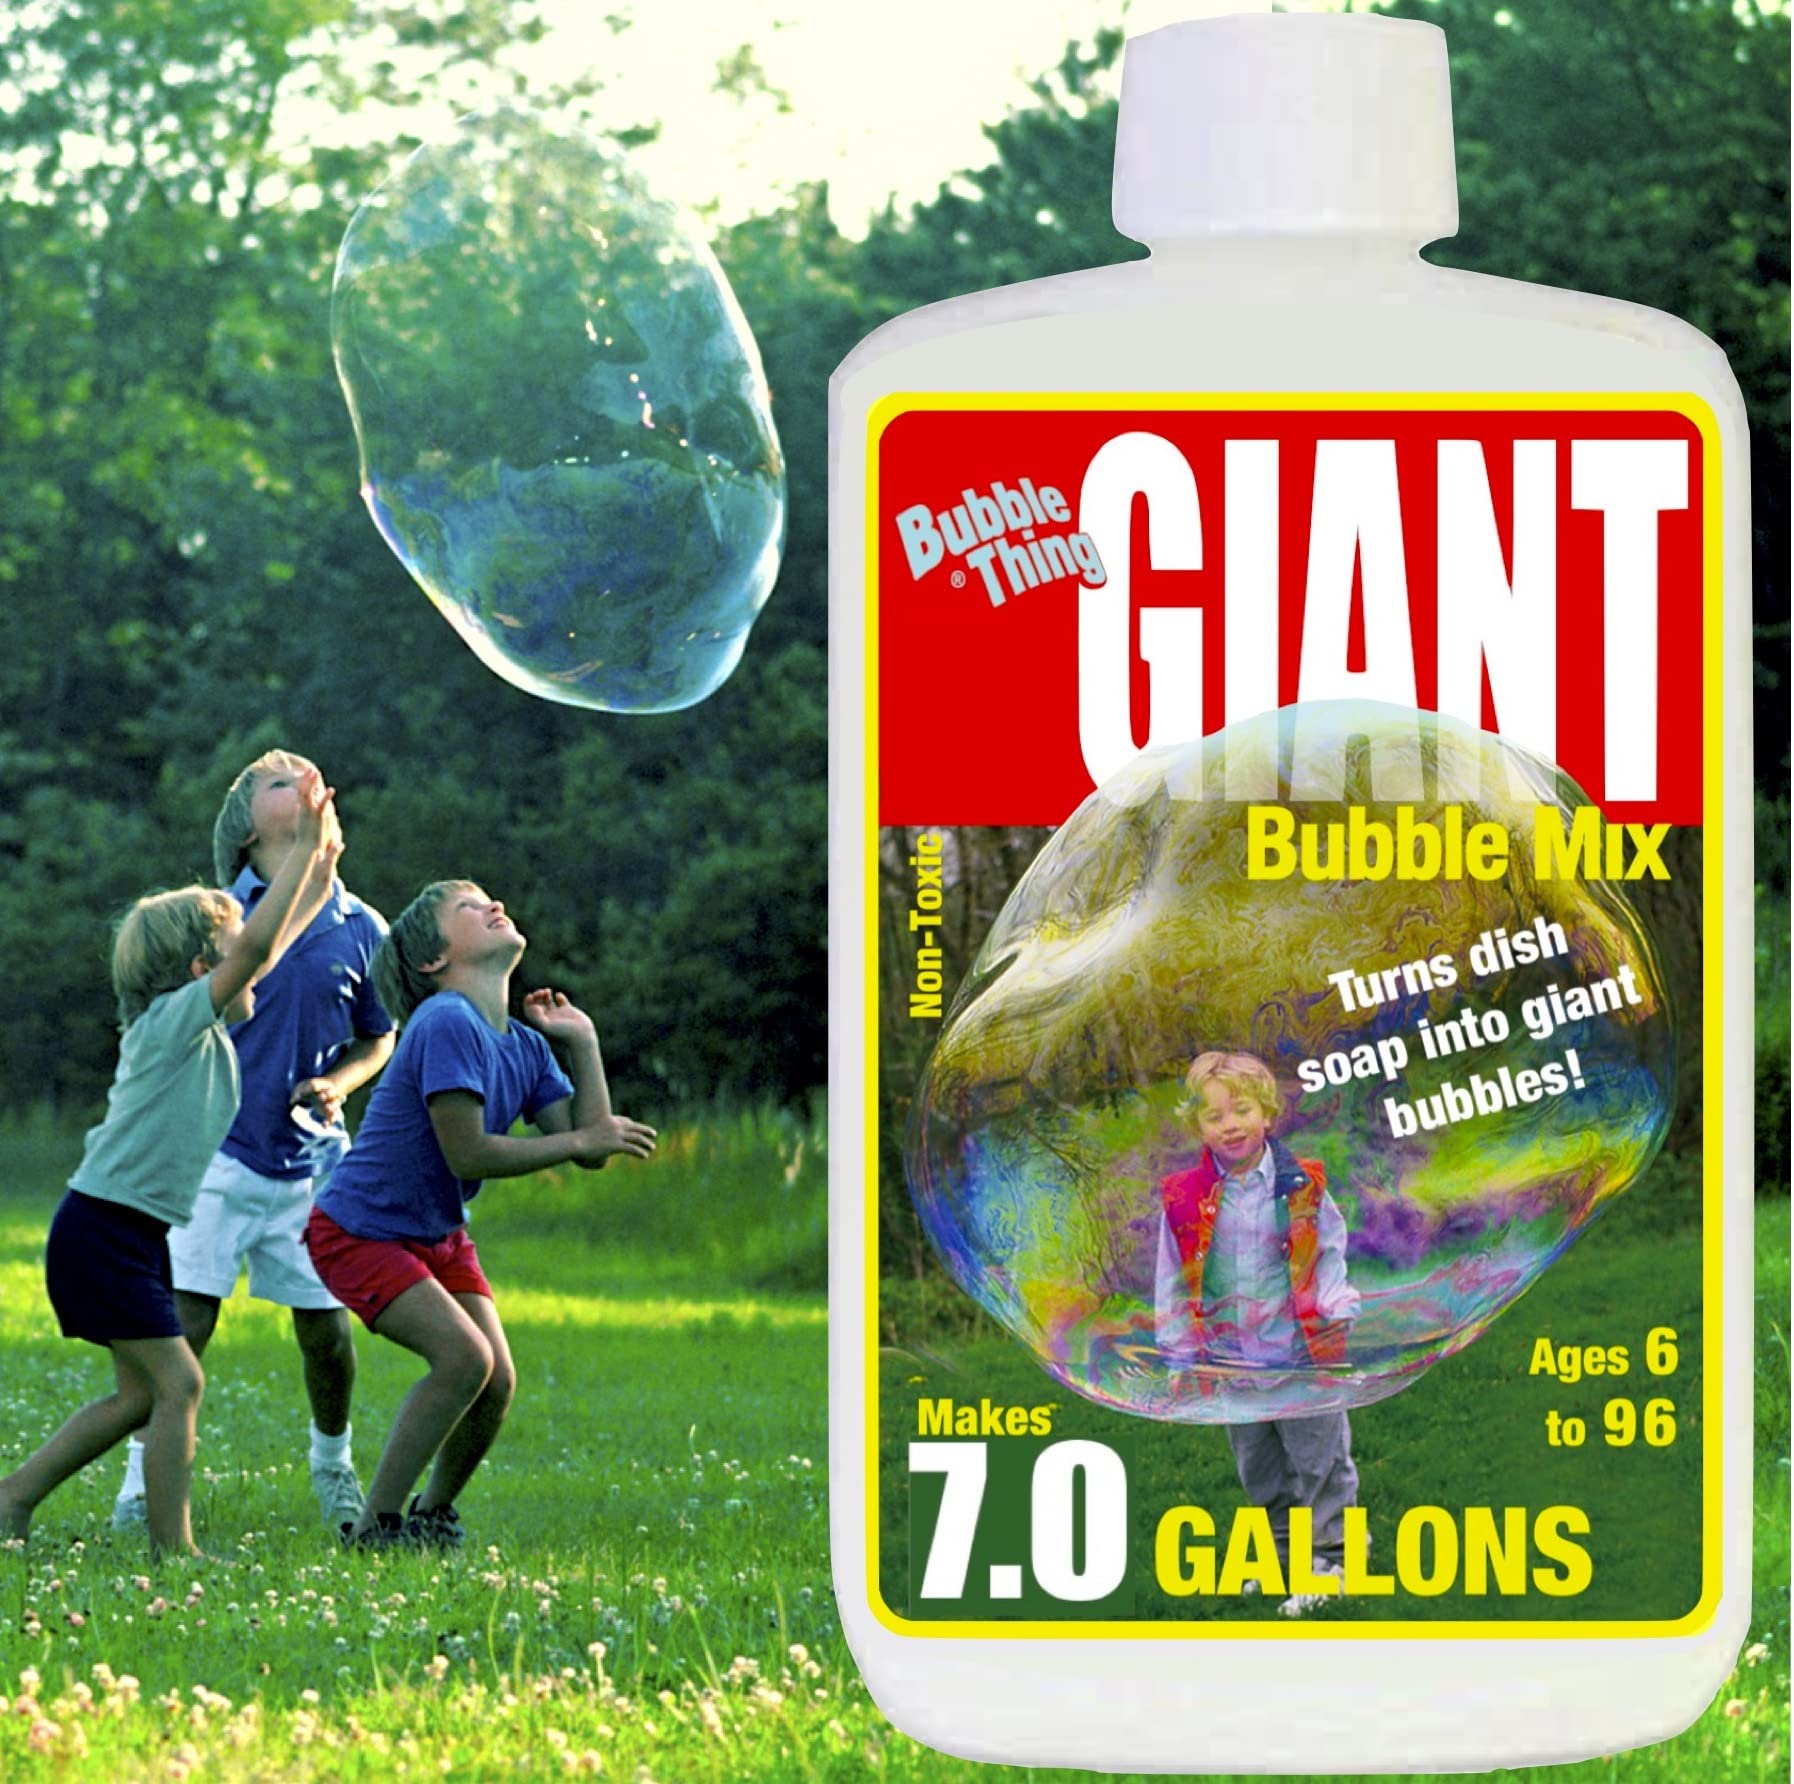 BUBBLETHING GIANT Bubble Mix | Concentrate Makes 7 Gallons Big Bubble Solution for Kids All Ages | Refills Giant Bubble Wands, Toys, Makers | Easy, Safe, Nontoxic Certified